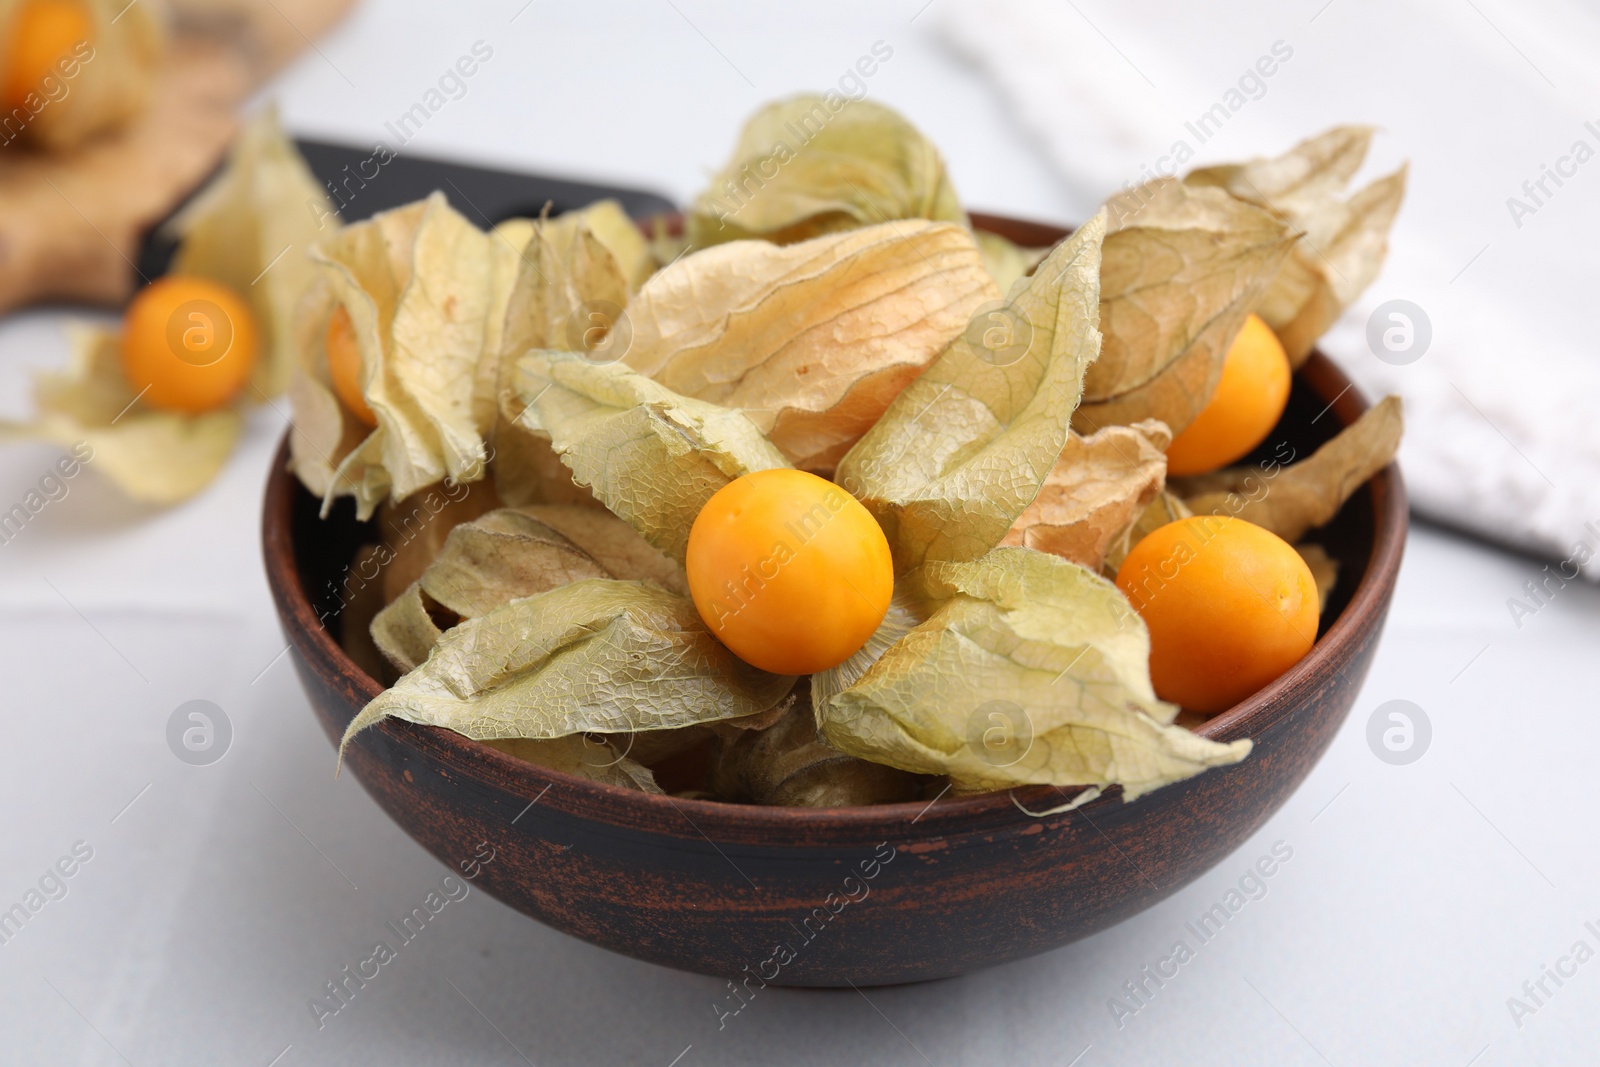 Photo of Ripe physalis fruits with calyxes in bowl on white table, closeup